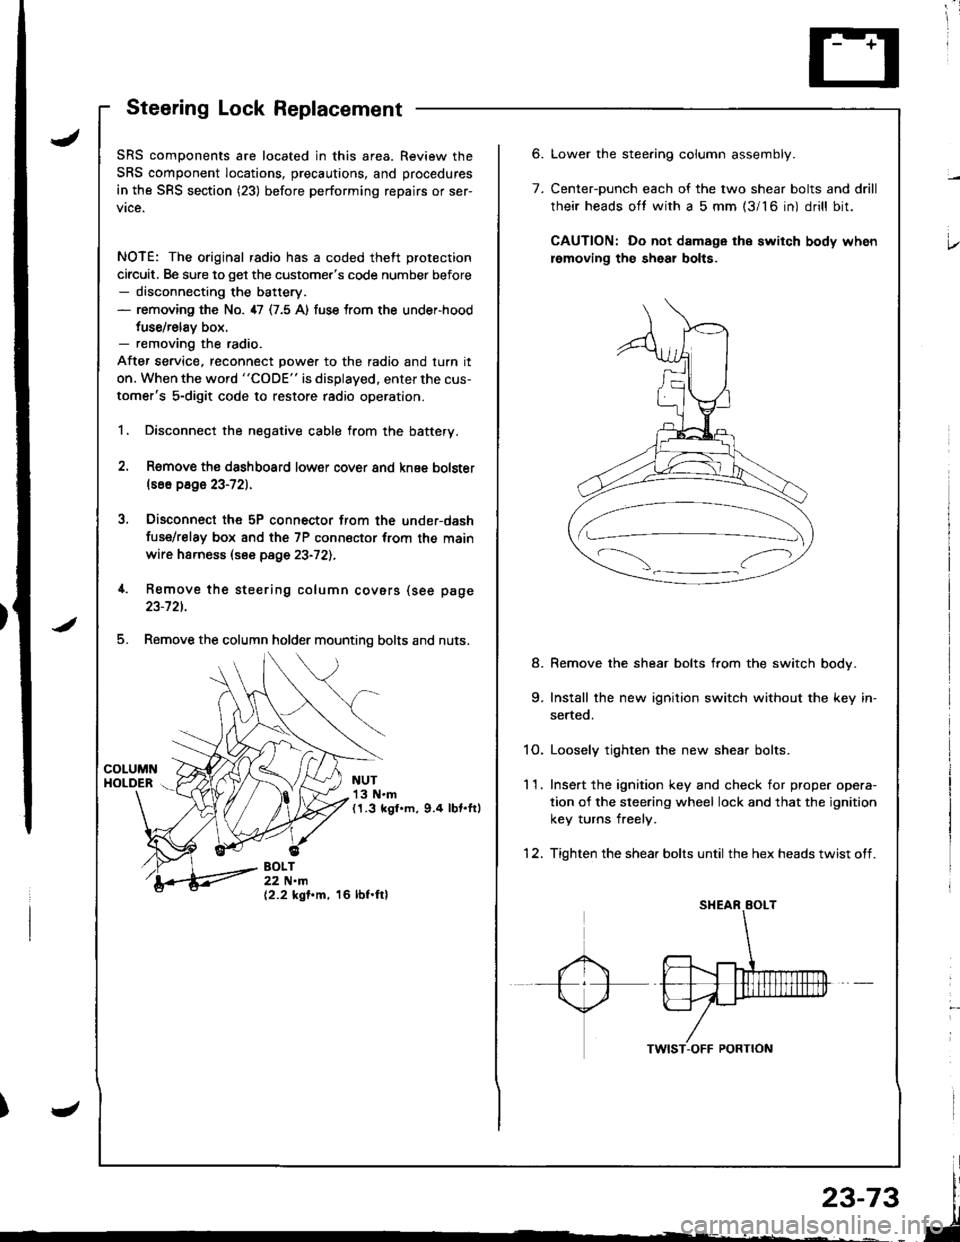 HONDA INTEGRA 1998 4.G Workshop Manual ;
Steering Lock Replacement
SRS components are located in this area. Review the
SRS component locations, precautions, and procedures
in the SRS section (23) before performing repairs or ser-
vice.
NOT